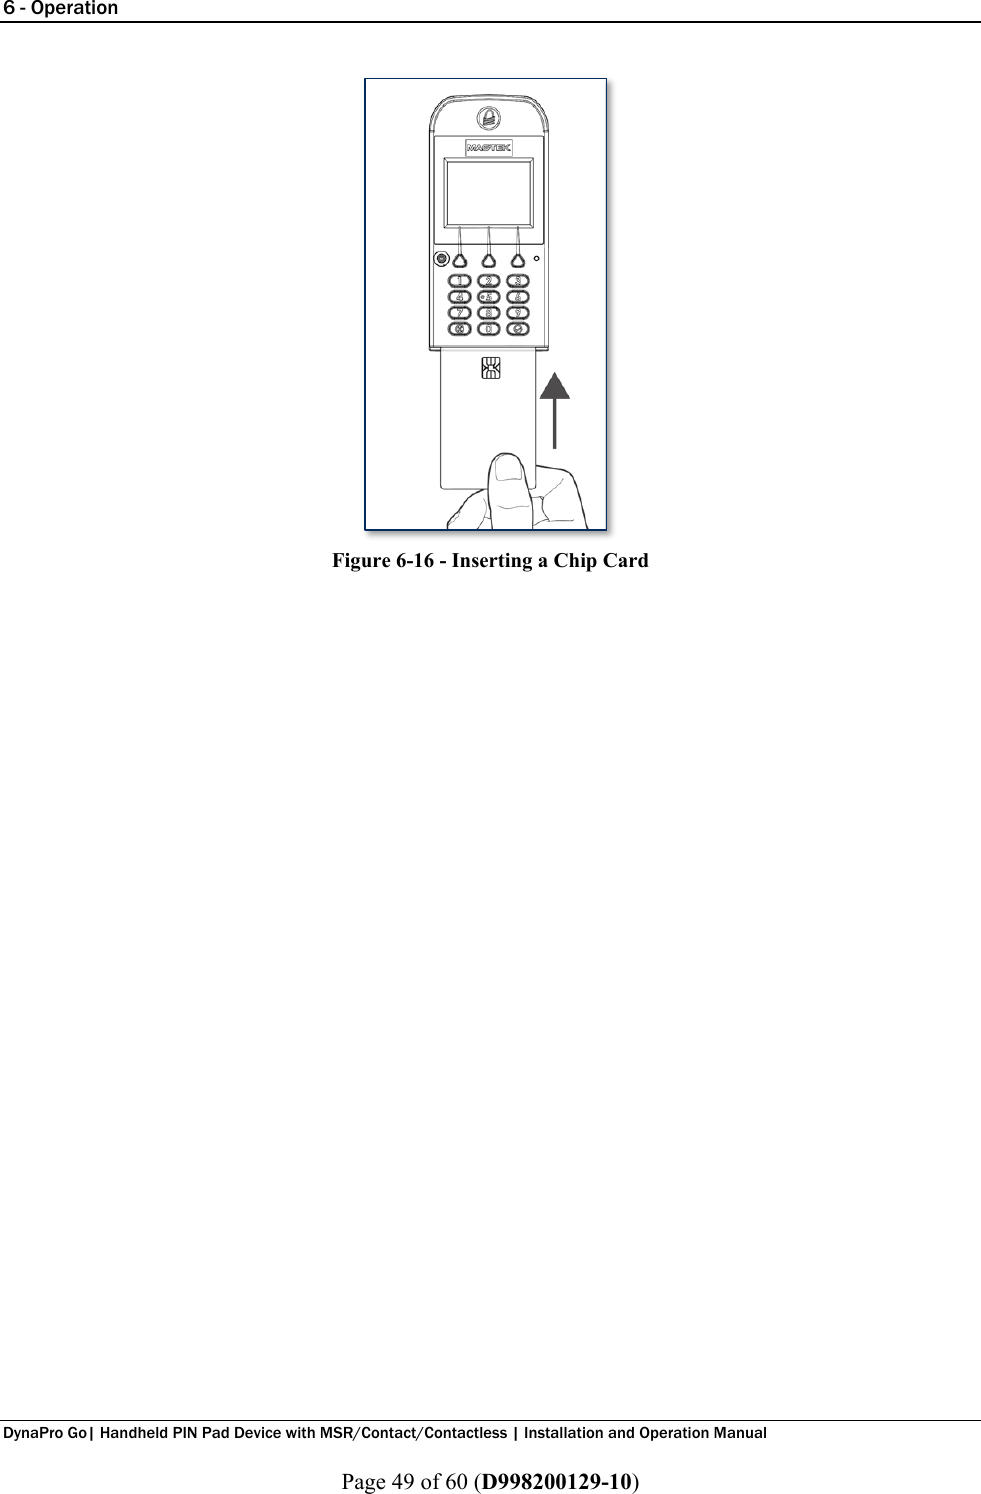 6 - Operation  DynaPro Go| Handheld PIN Pad Device with MSR/Contact/Contactless | Installation and Operation Manual  Page 49 of 60 (D998200129-10)  Figure 6-16 - Inserting a Chip Card    